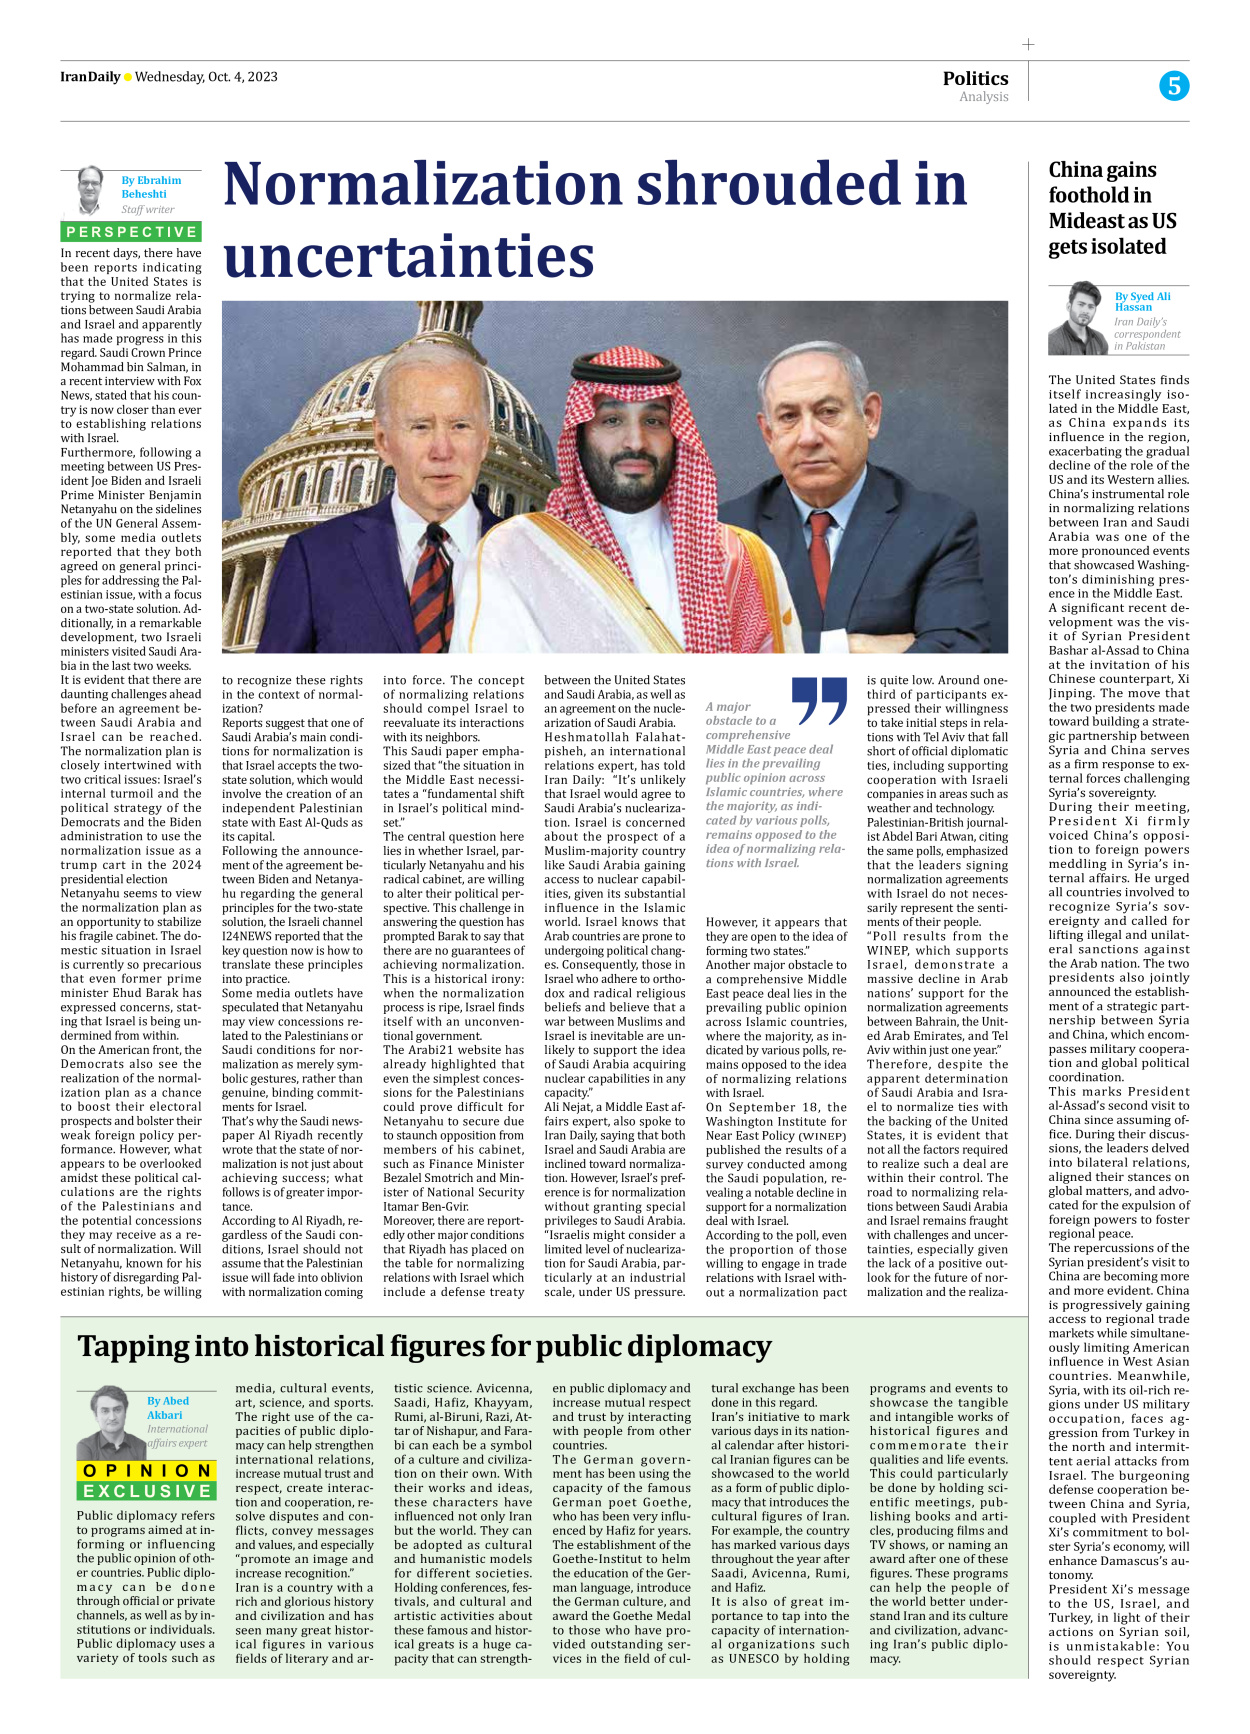 Iran Daily - Number Seven Thousand Three Hundred and Ninety Nine - 04 October 2023 - Page 5